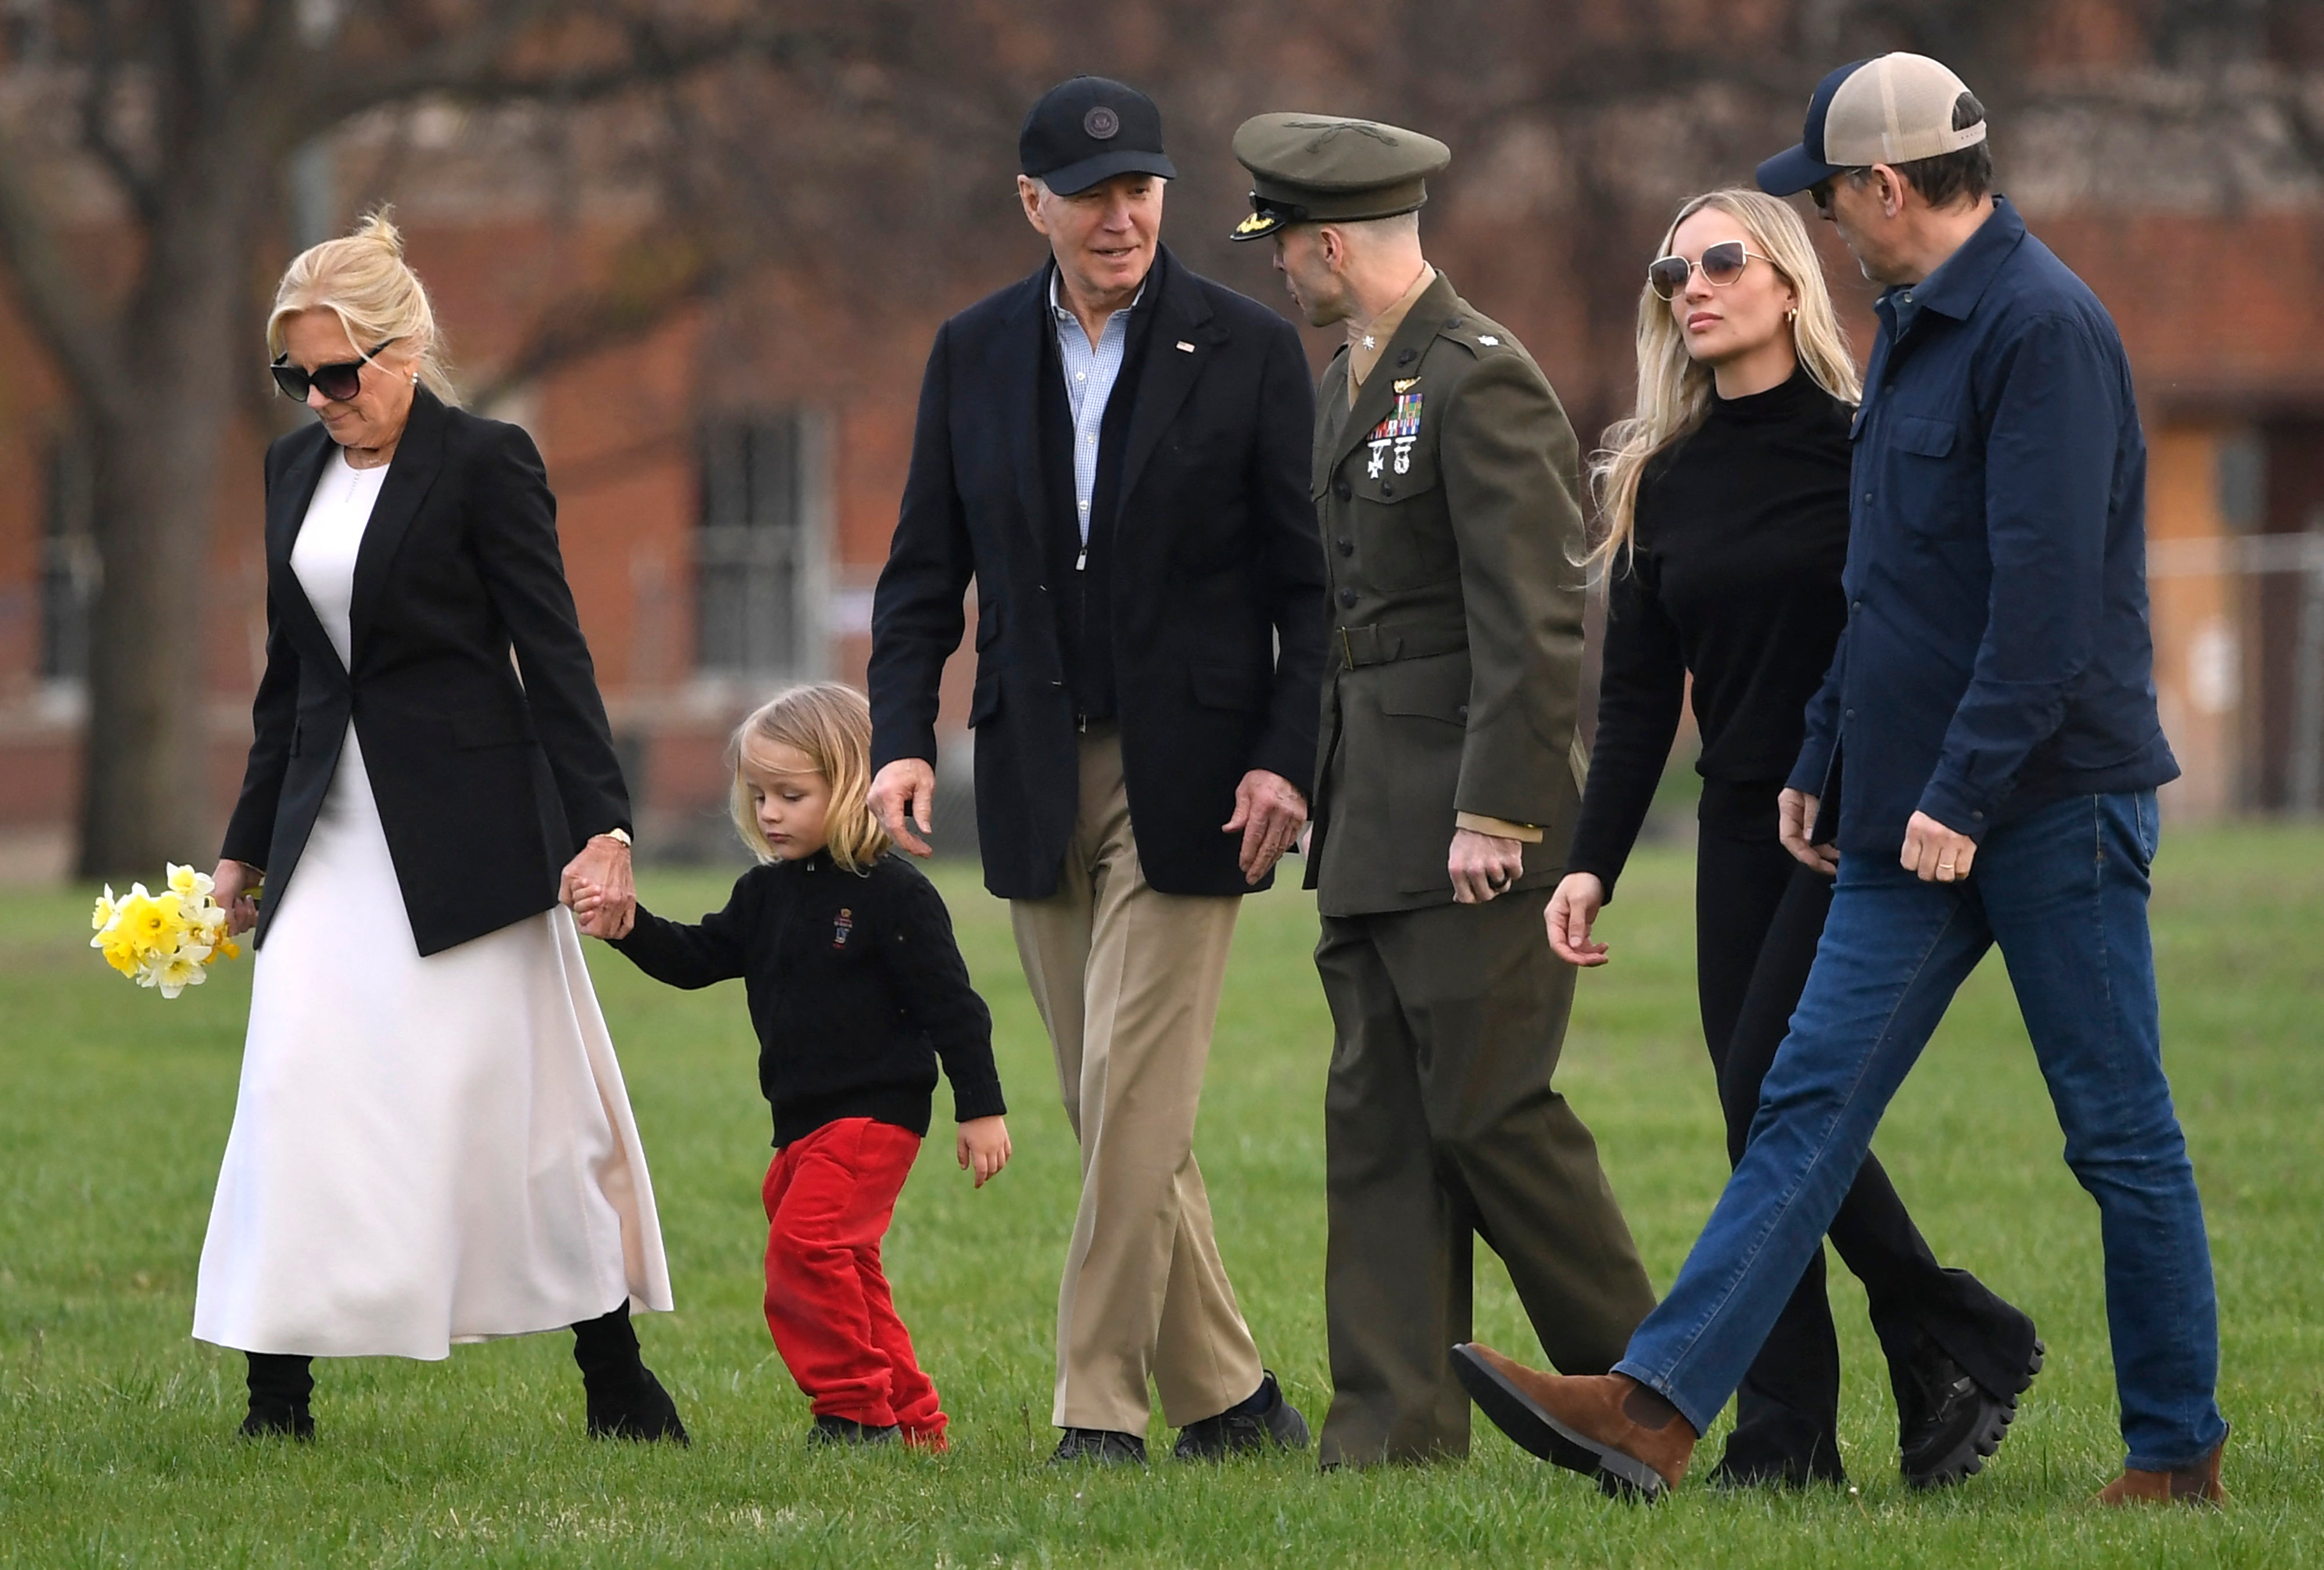 President Joe Biden talks to his Marine escort as he walks with grandson Beau and first lady Jill Biden as son Hunter Biden (R) walks with his wife Melissa, upon arrival at Fort McNair in Washington, DC, on March 31